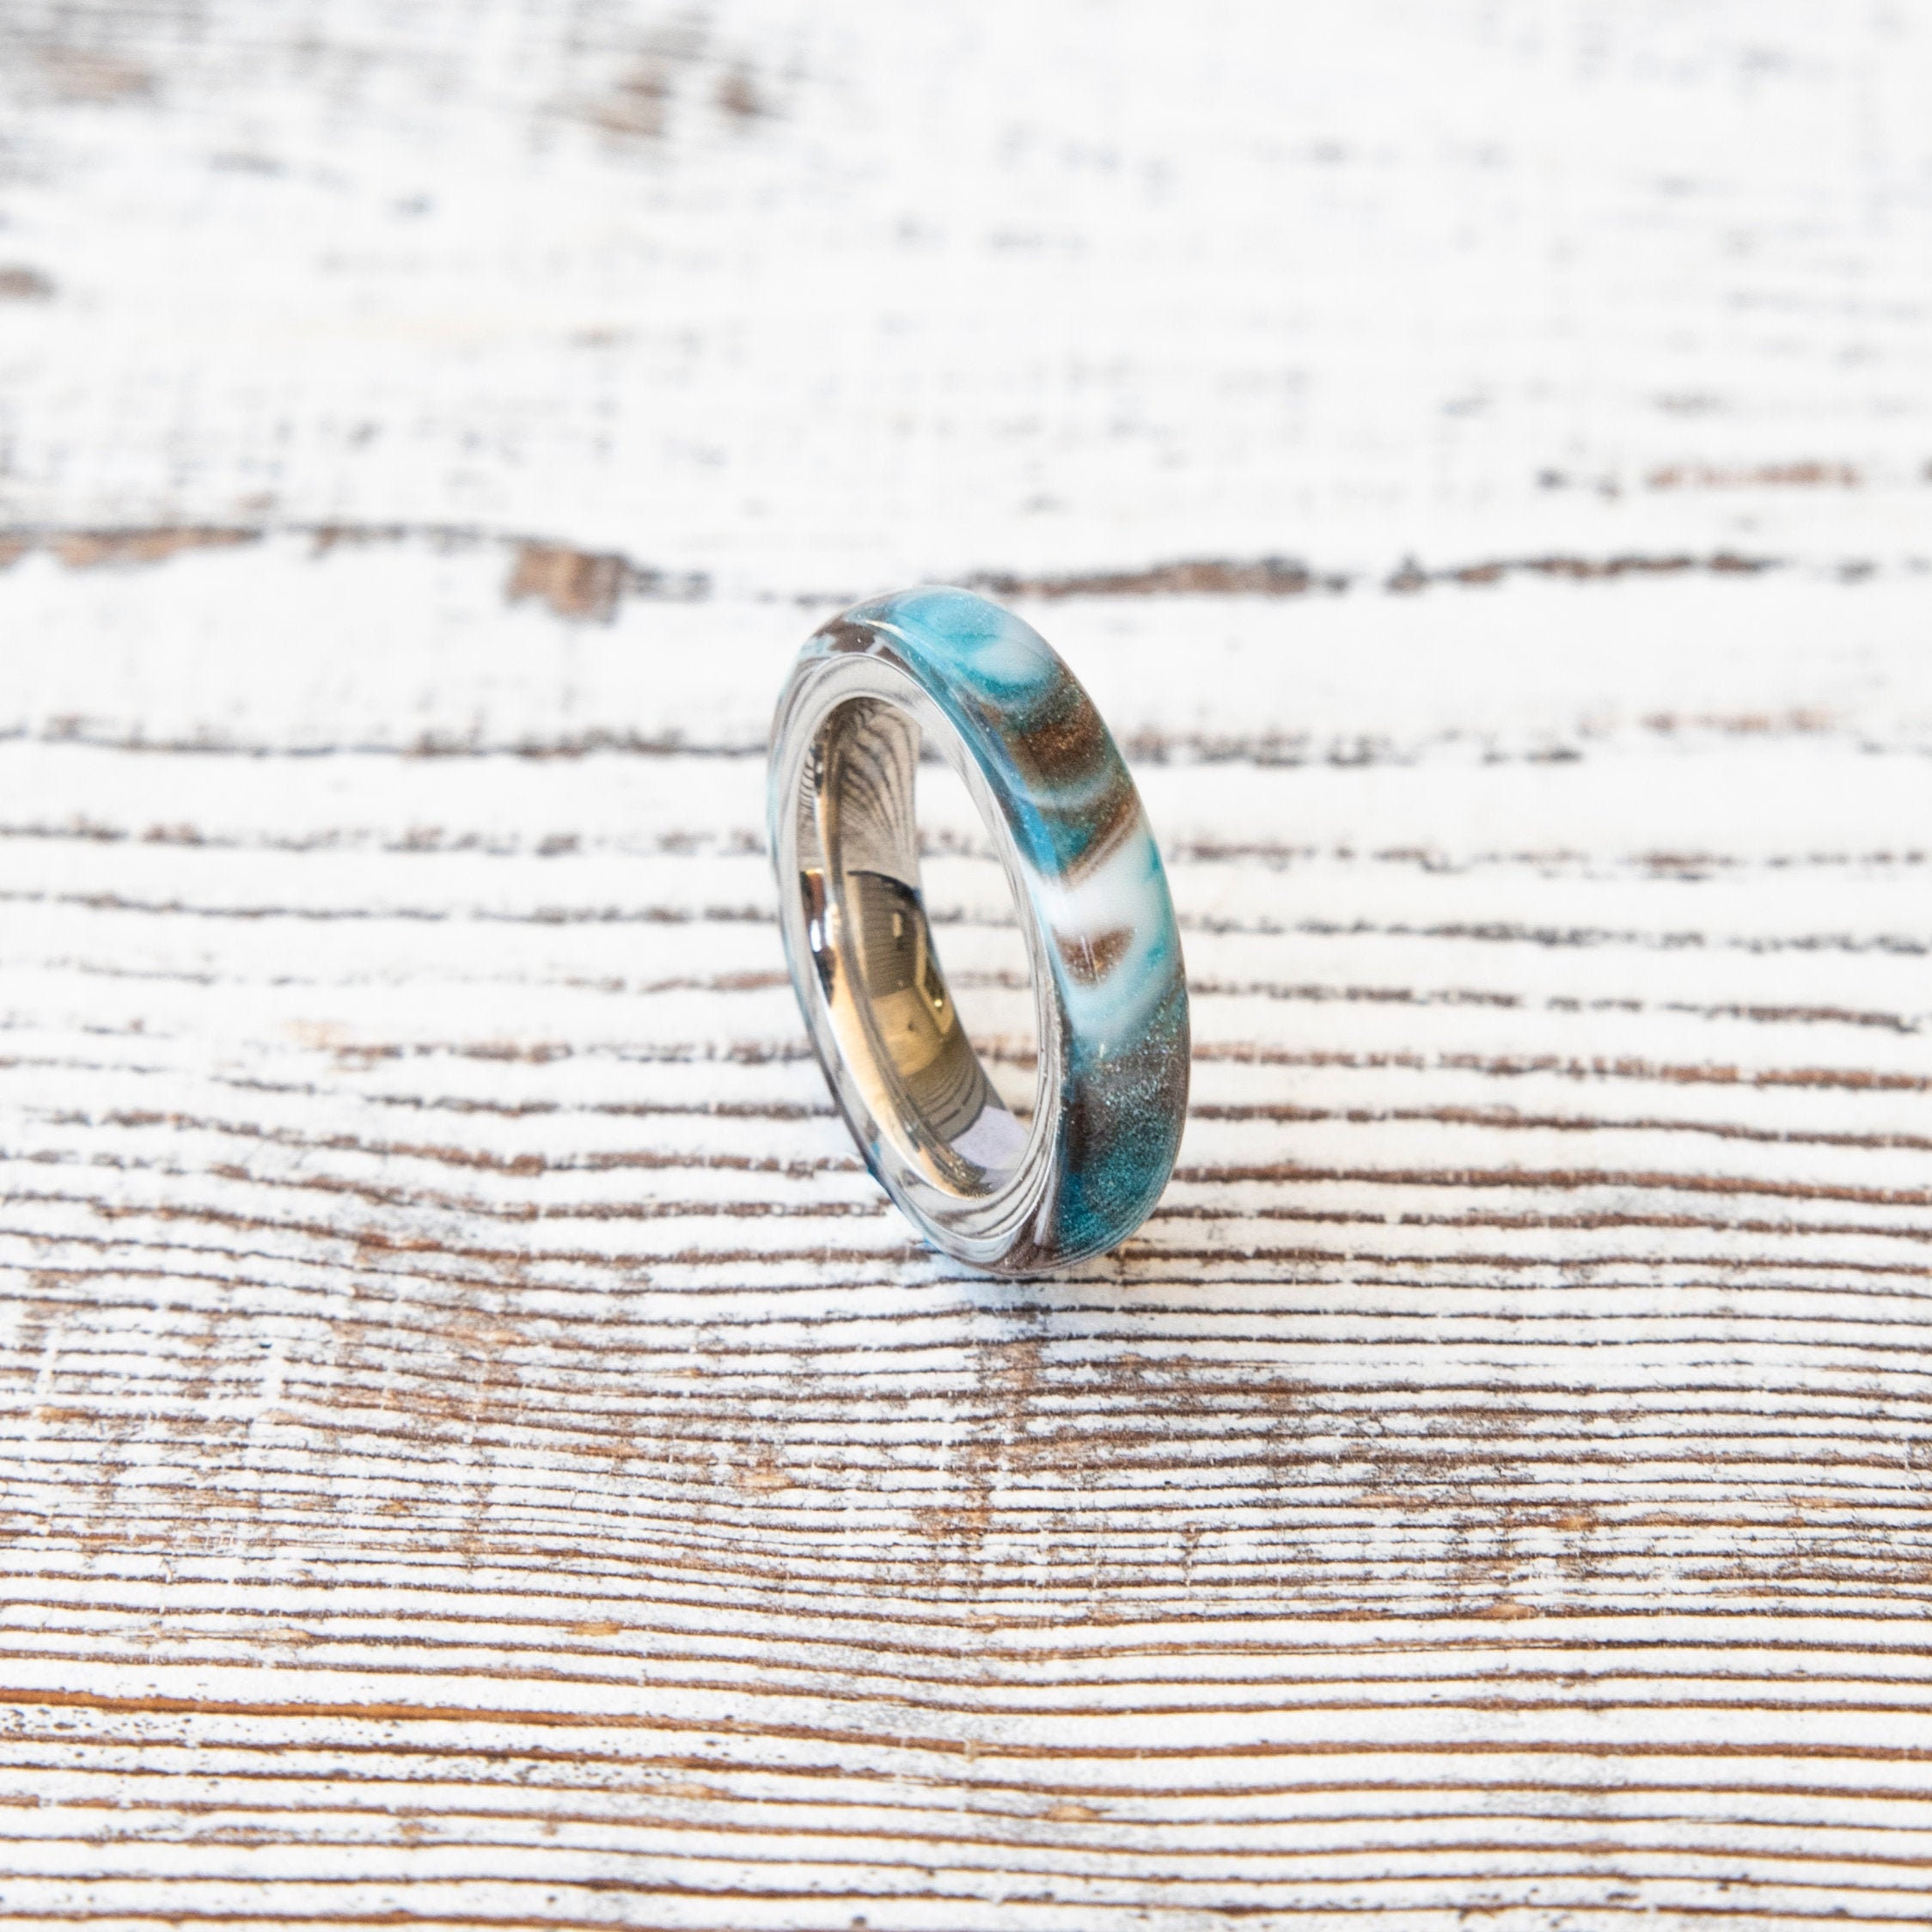 Resin Ring, Hand Turned, Light Blue and Copper, Crushed Diamond